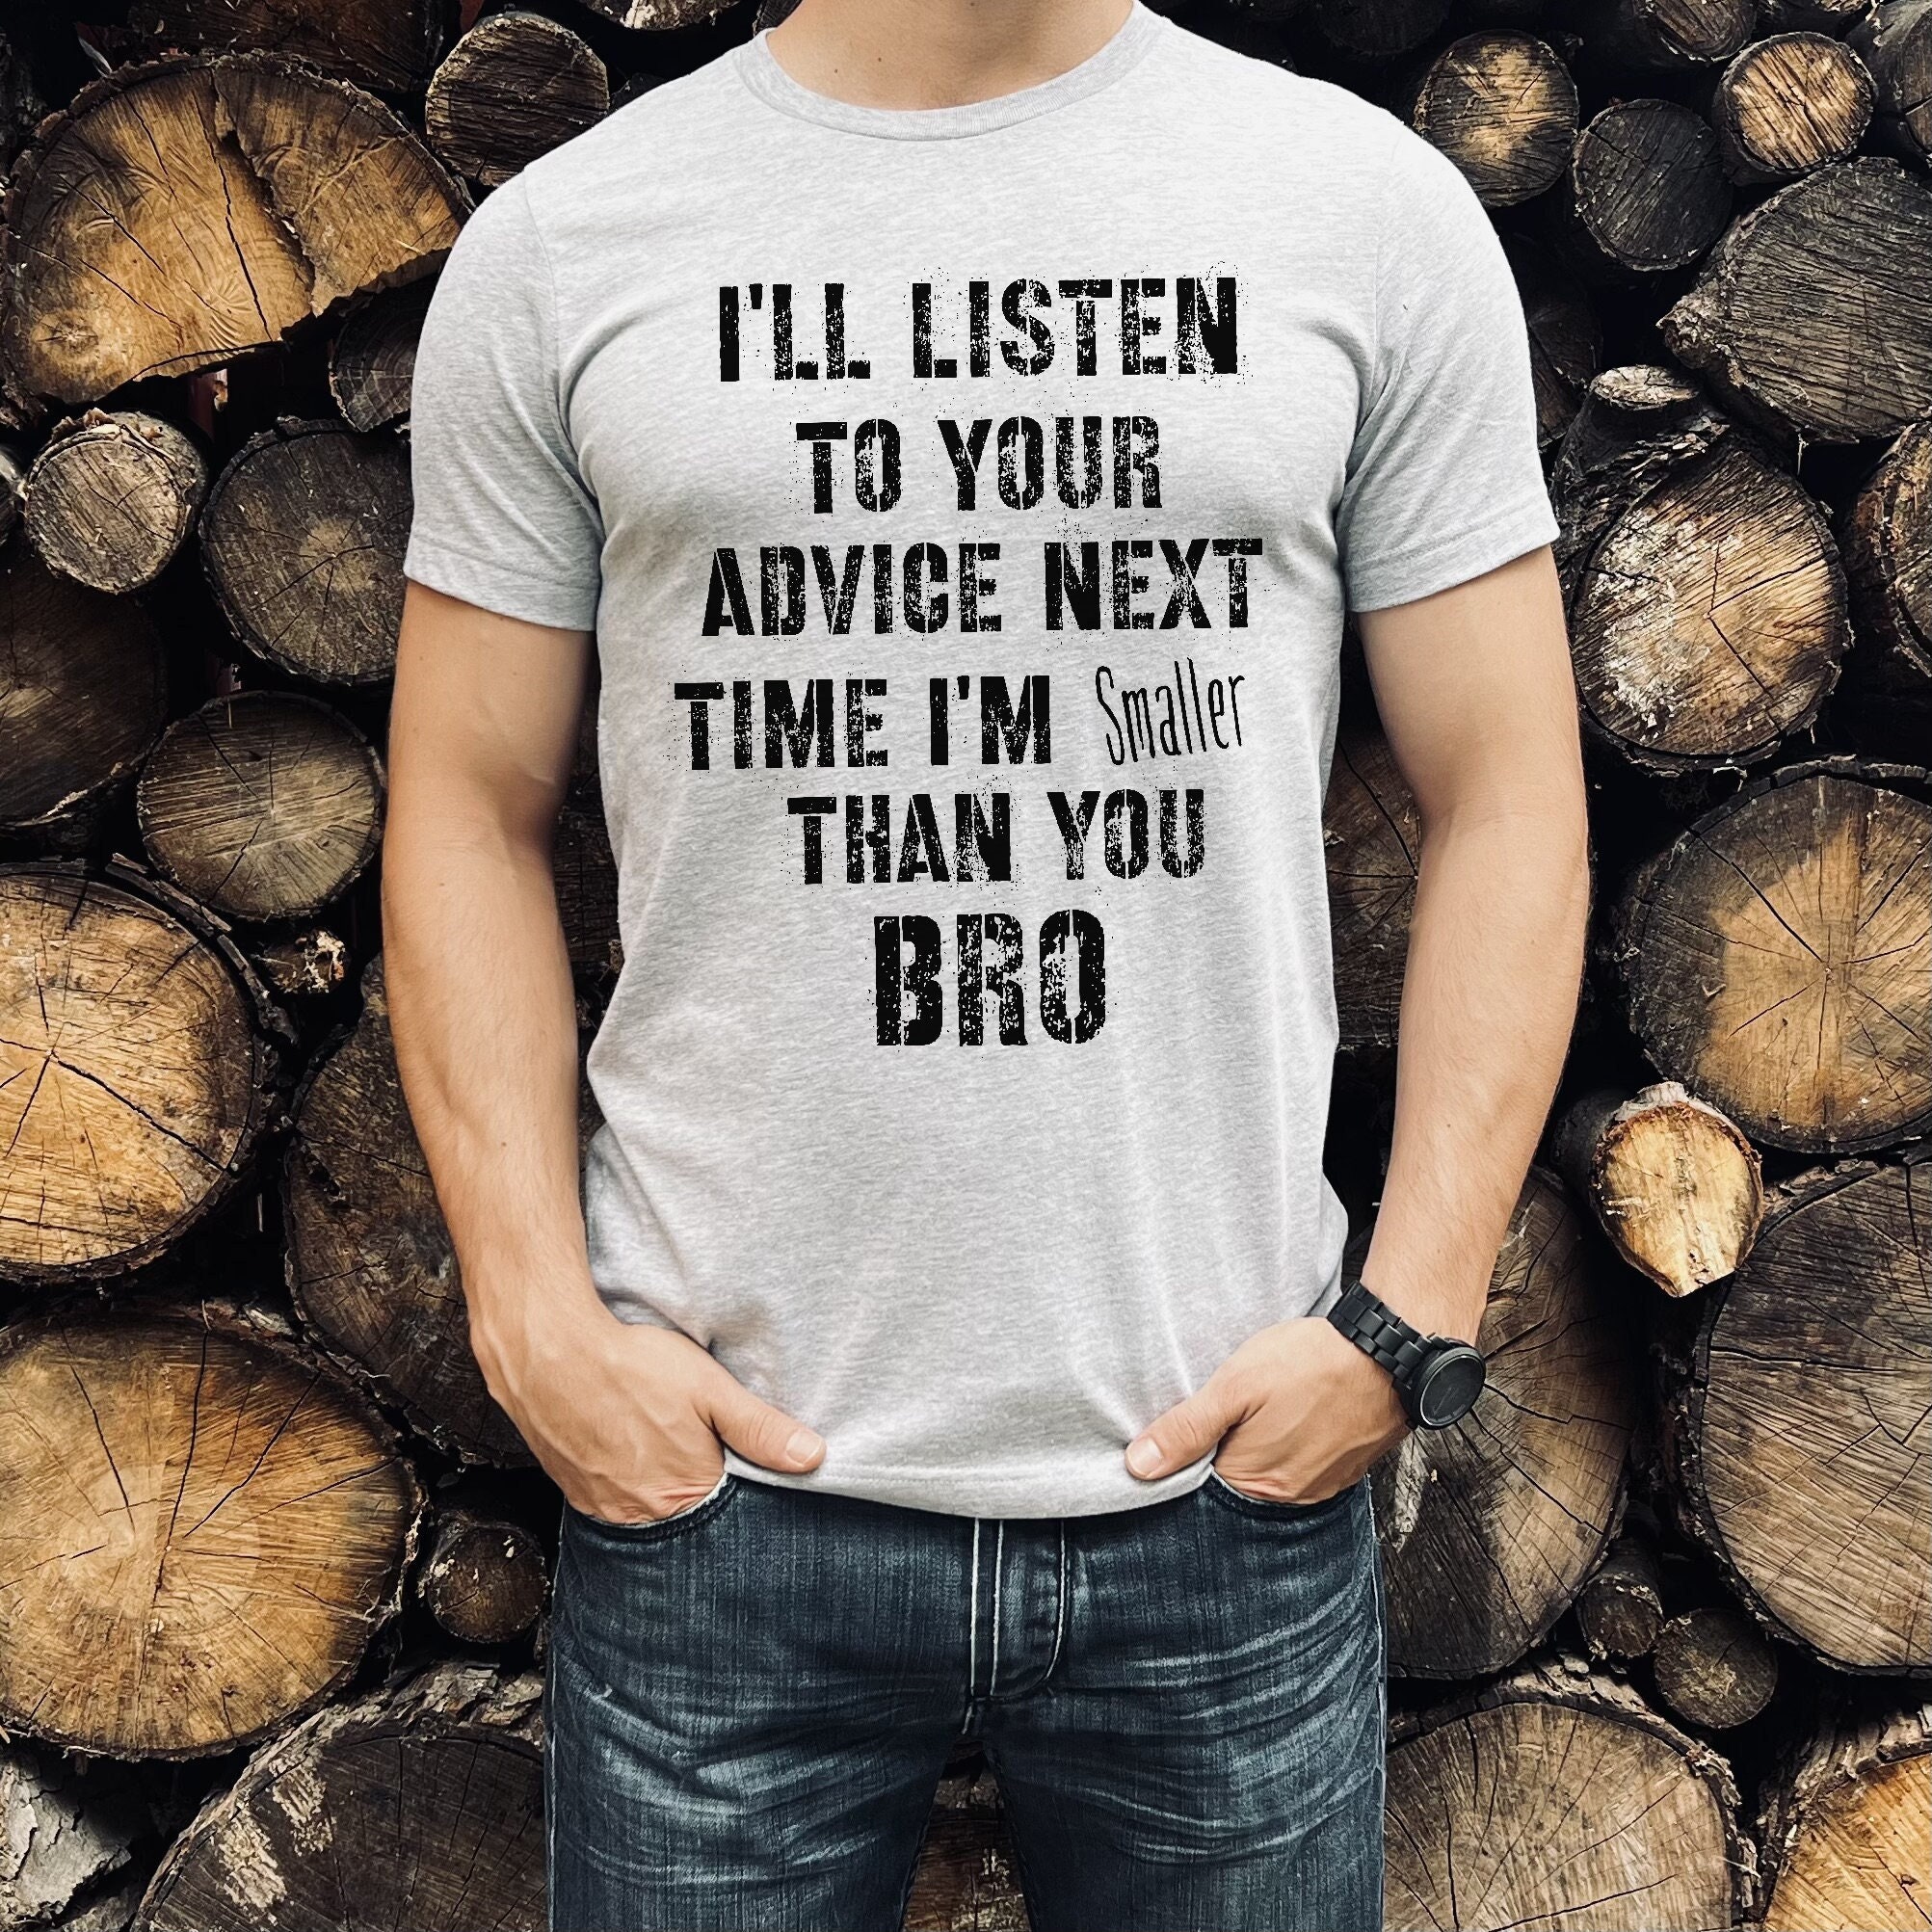 Gym Bro Gift - 60+ Gift Ideas for 2024